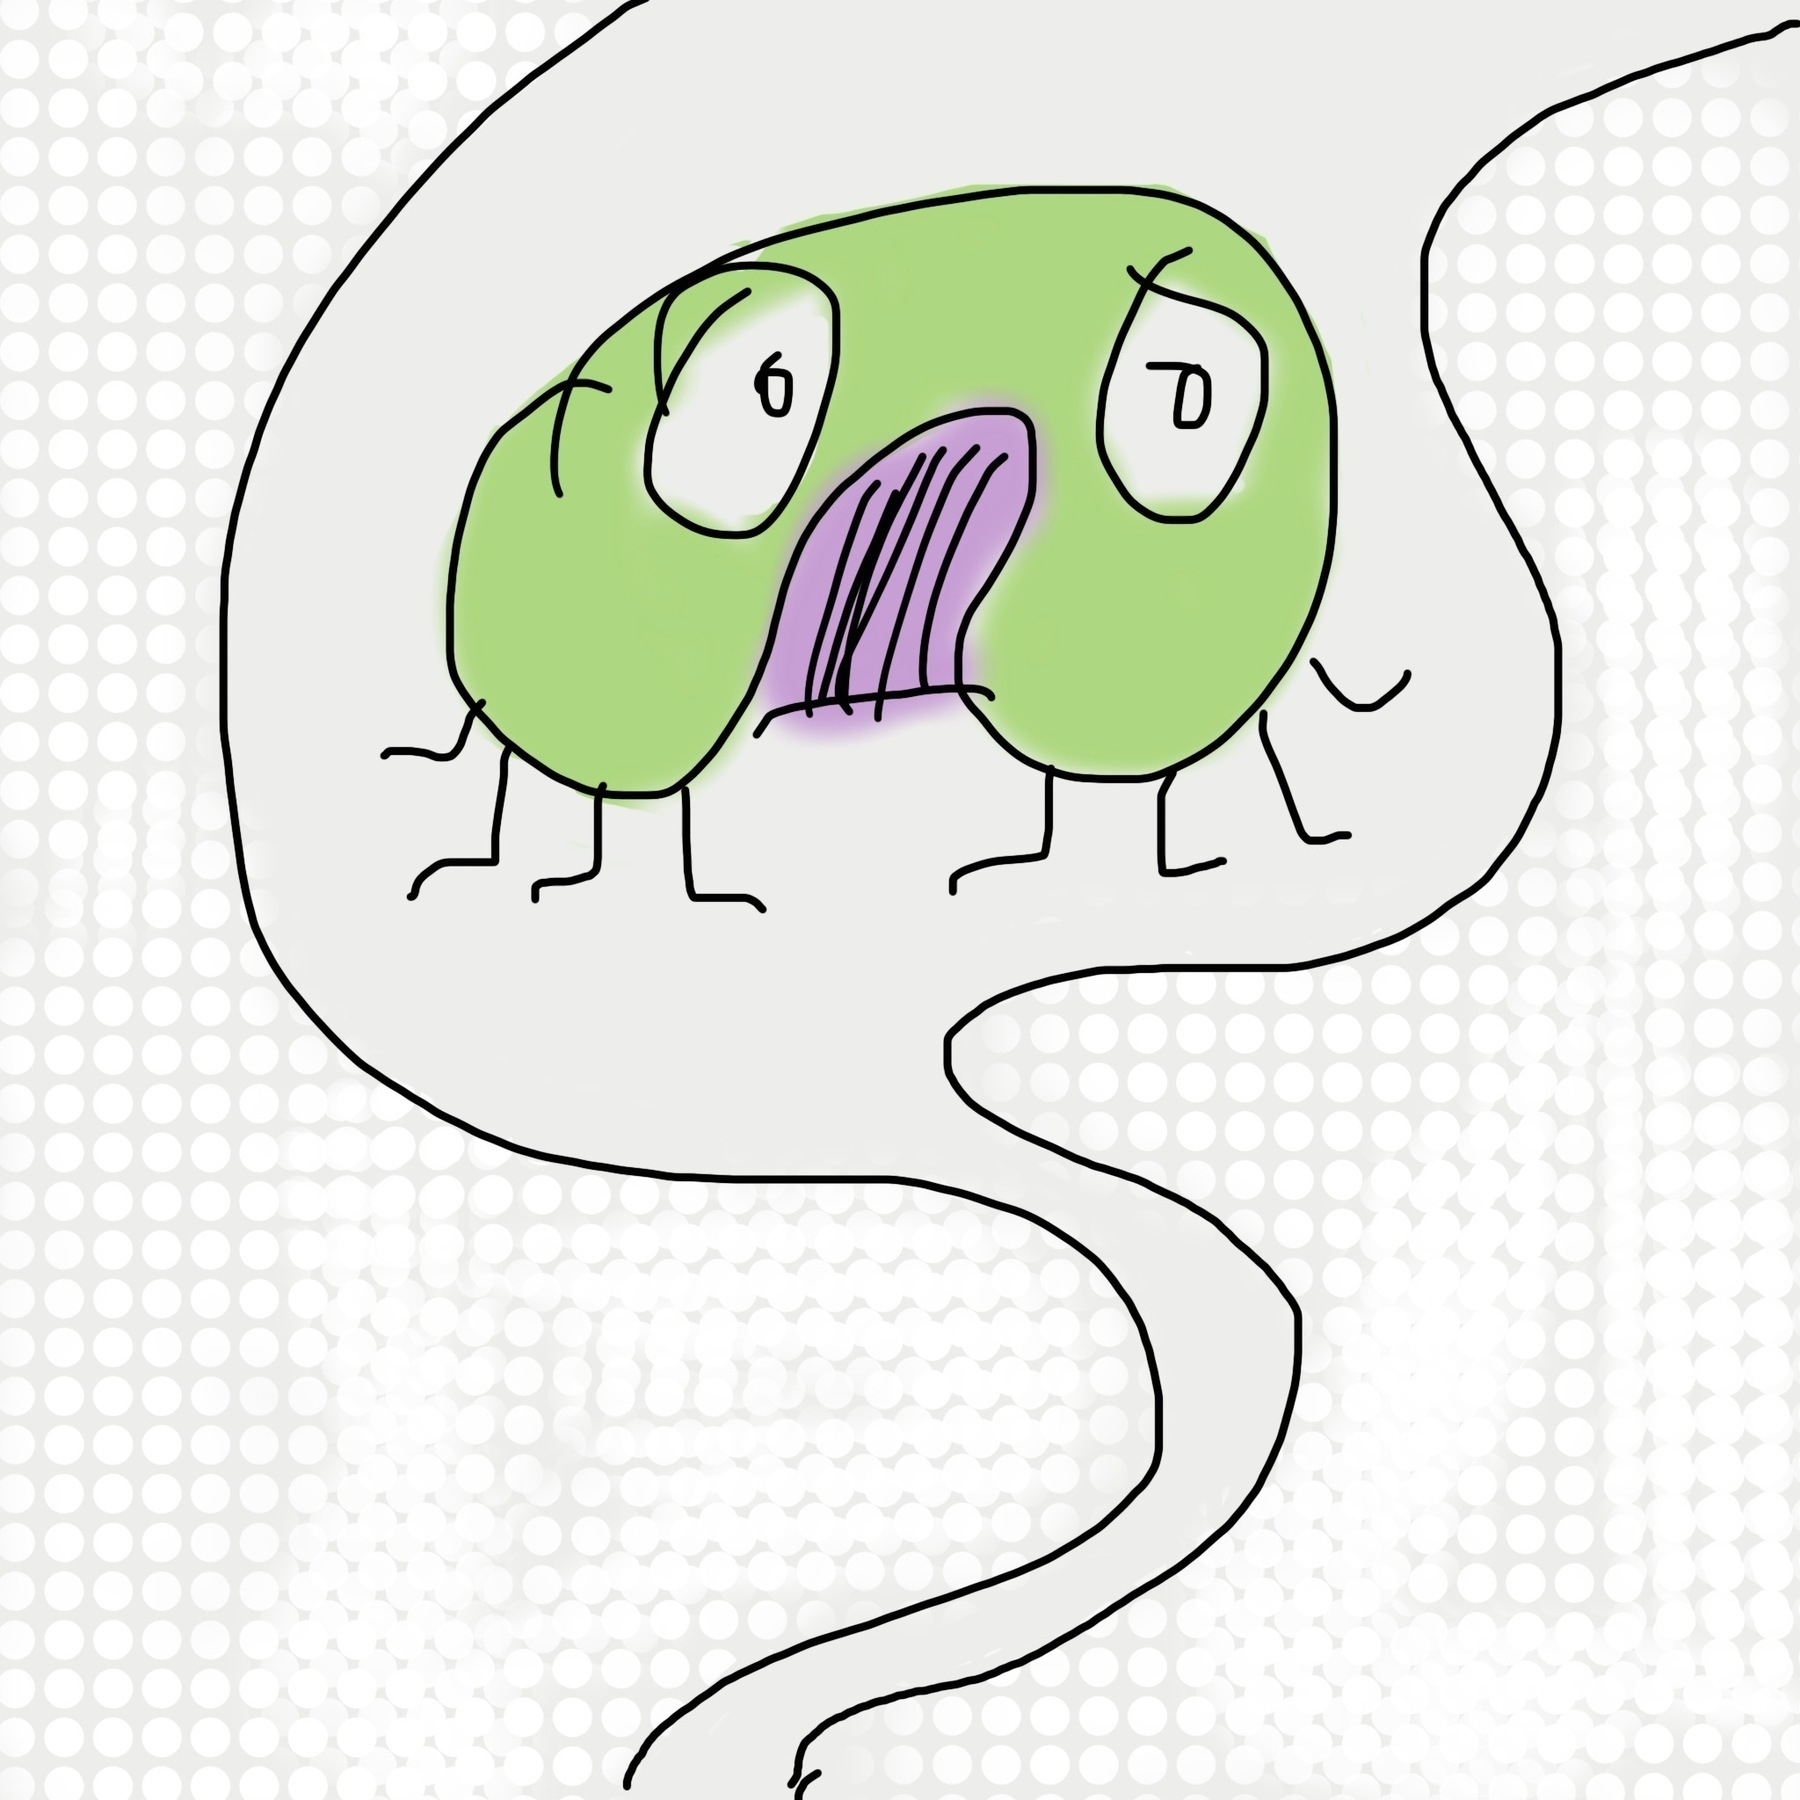 A drawing of an abstract, green character who looks scared